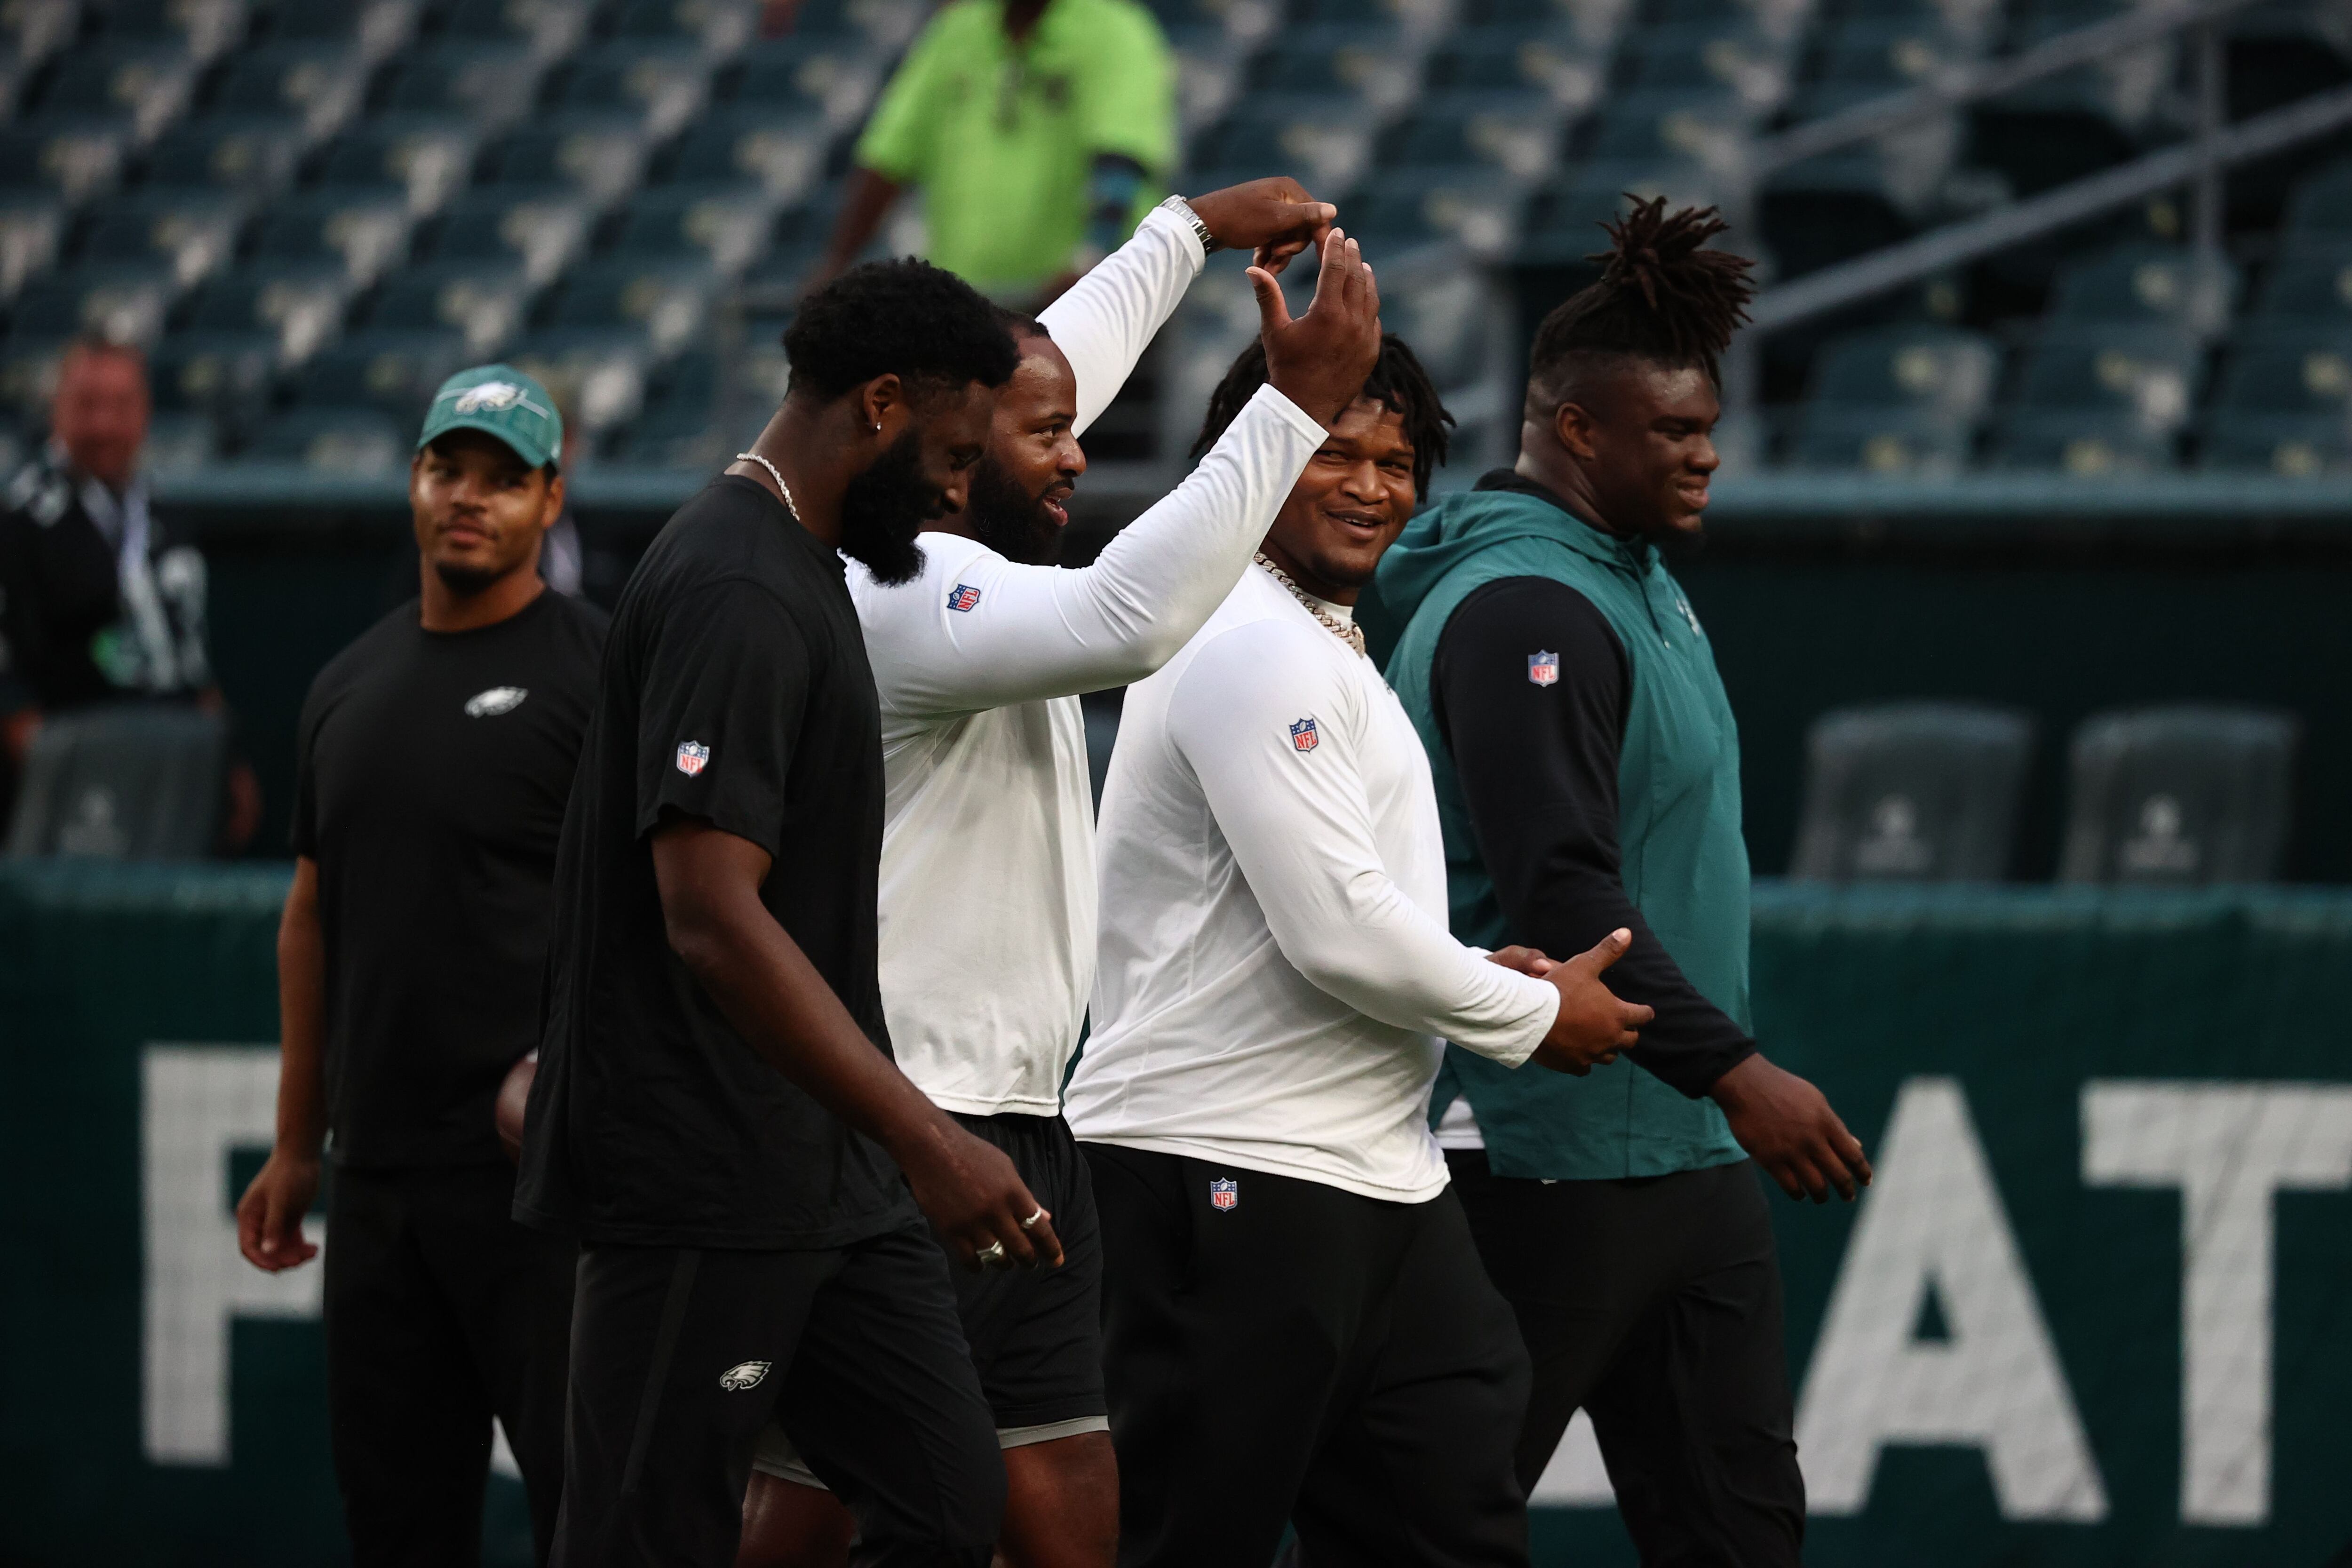 NFL Roster Core Rankings: Eagles at No. 1? - BVM Sports